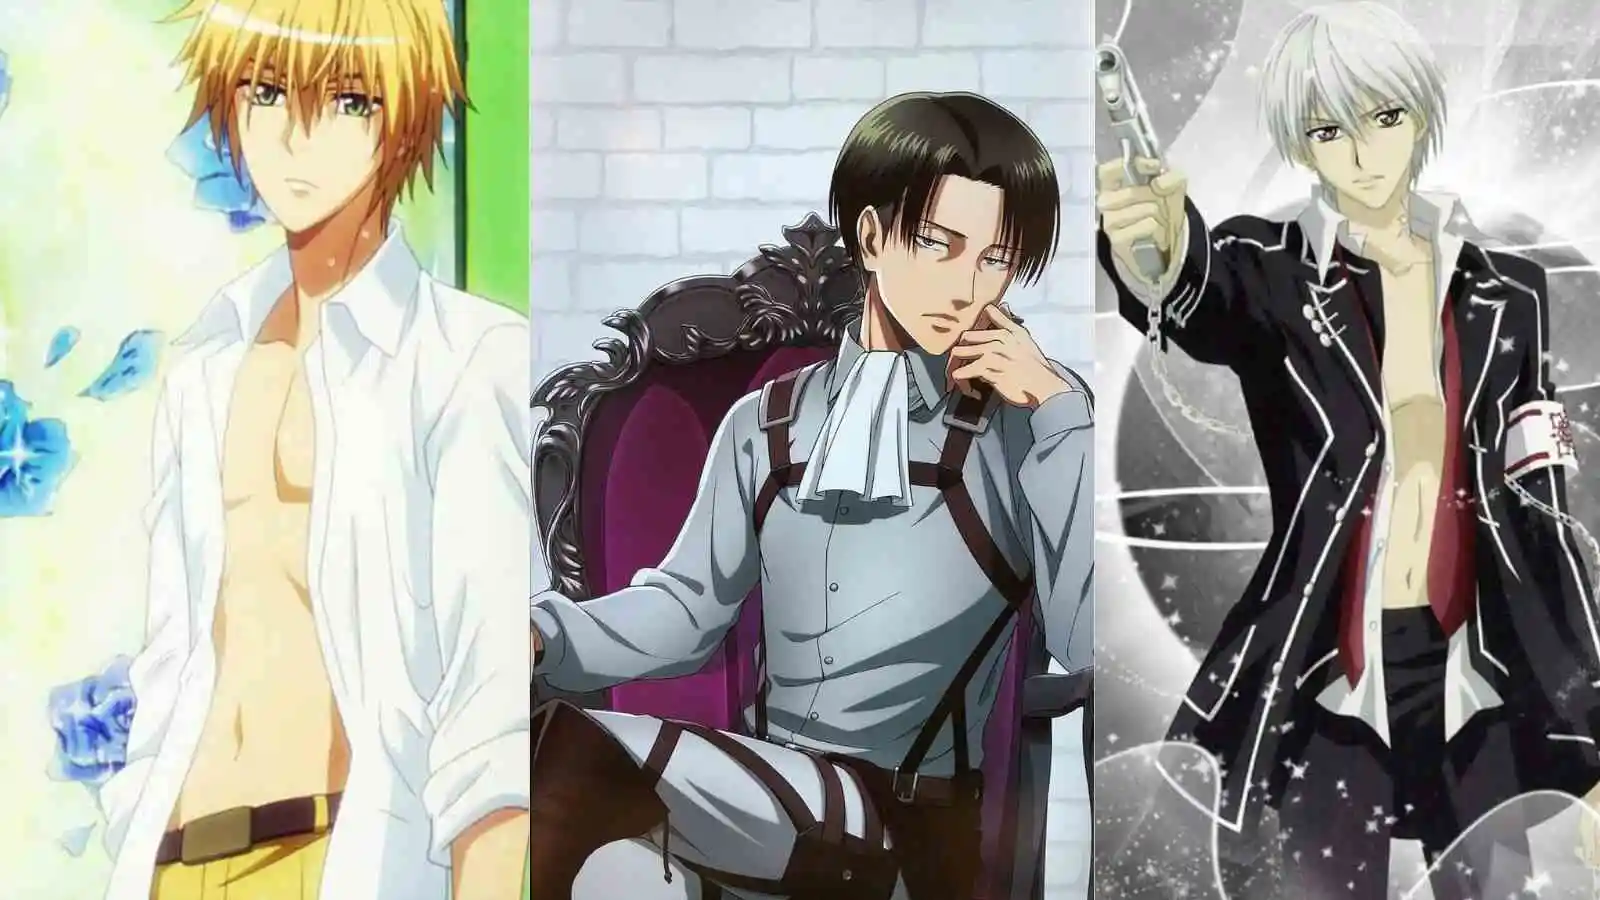 Discover the Hottest Anime Guys: A Must-See List!